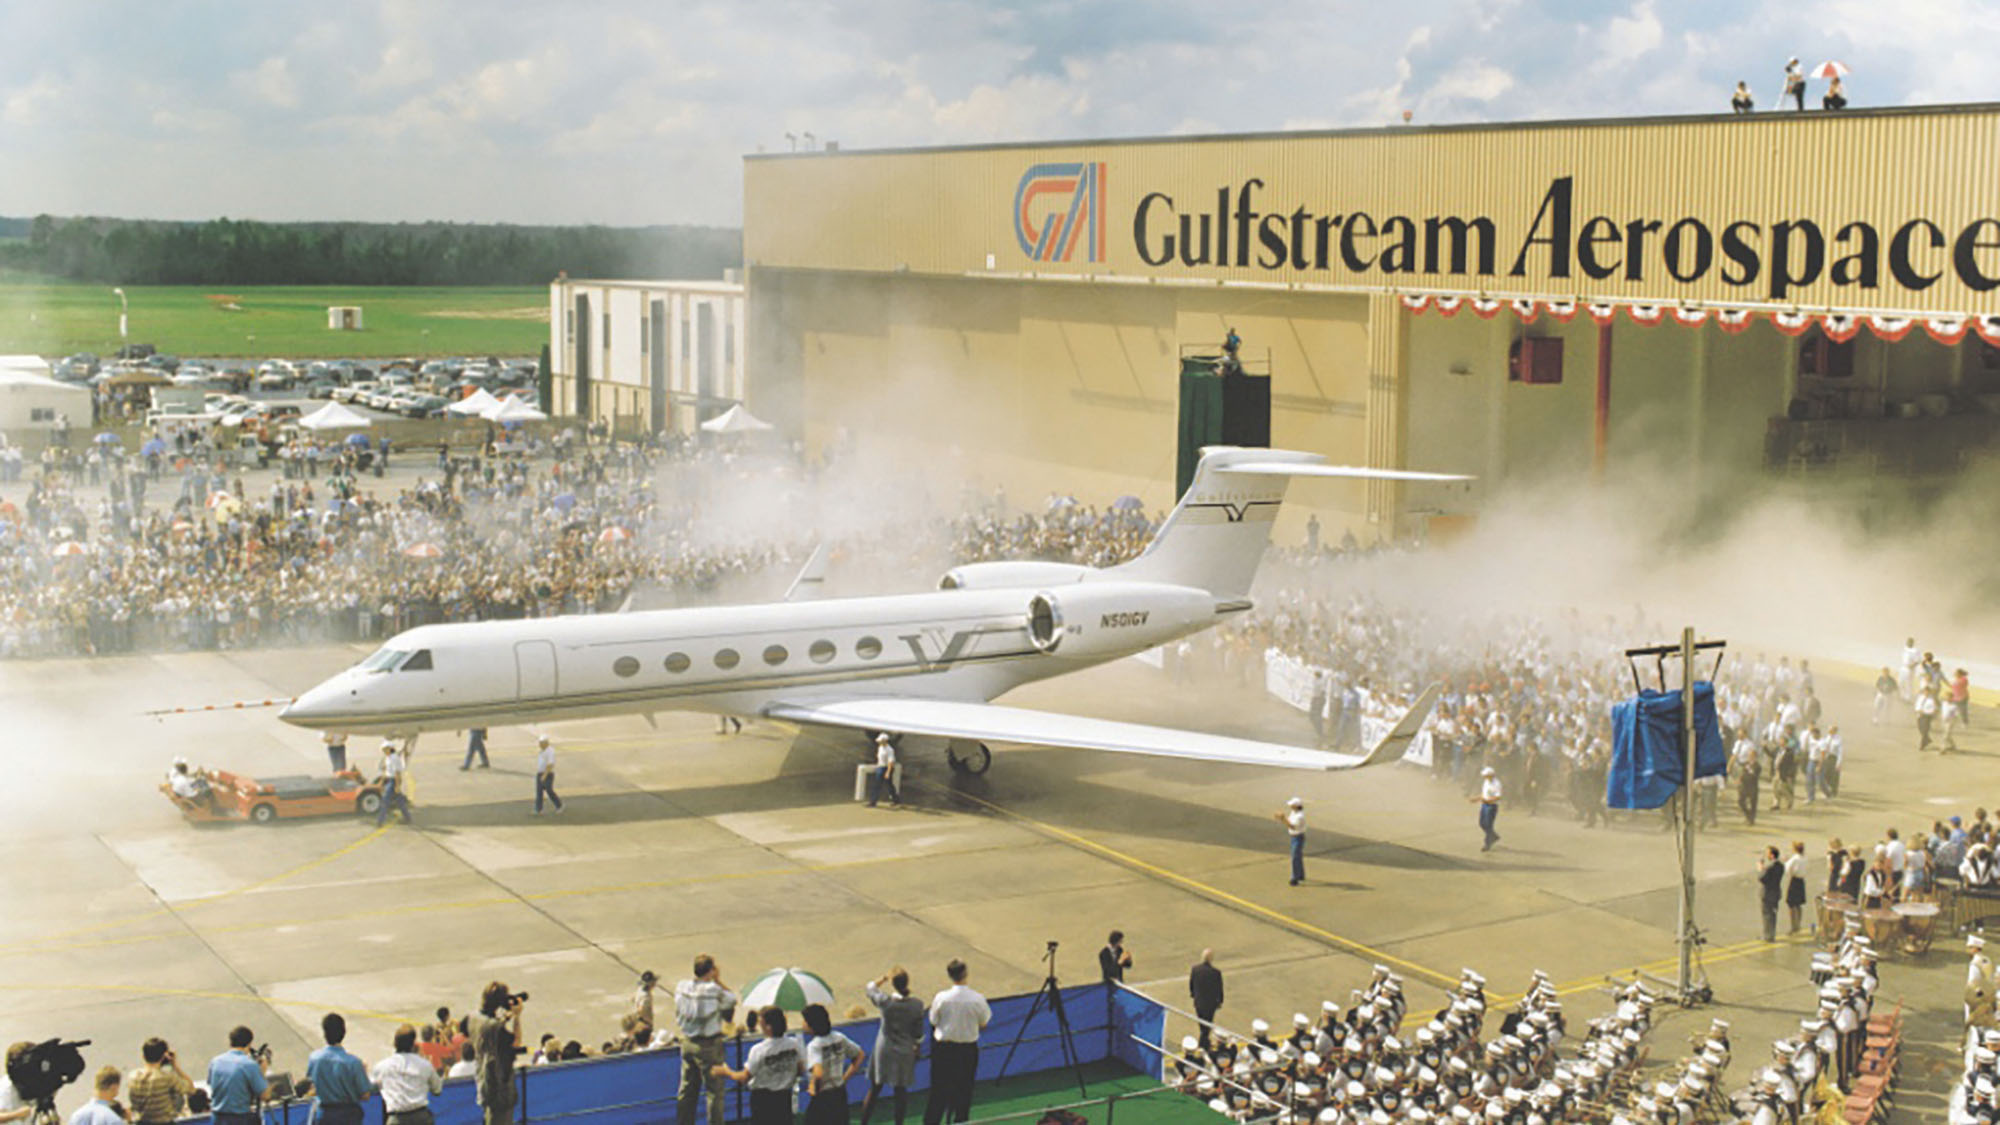 The Gulfstream GV rolls out on September 22, 1995